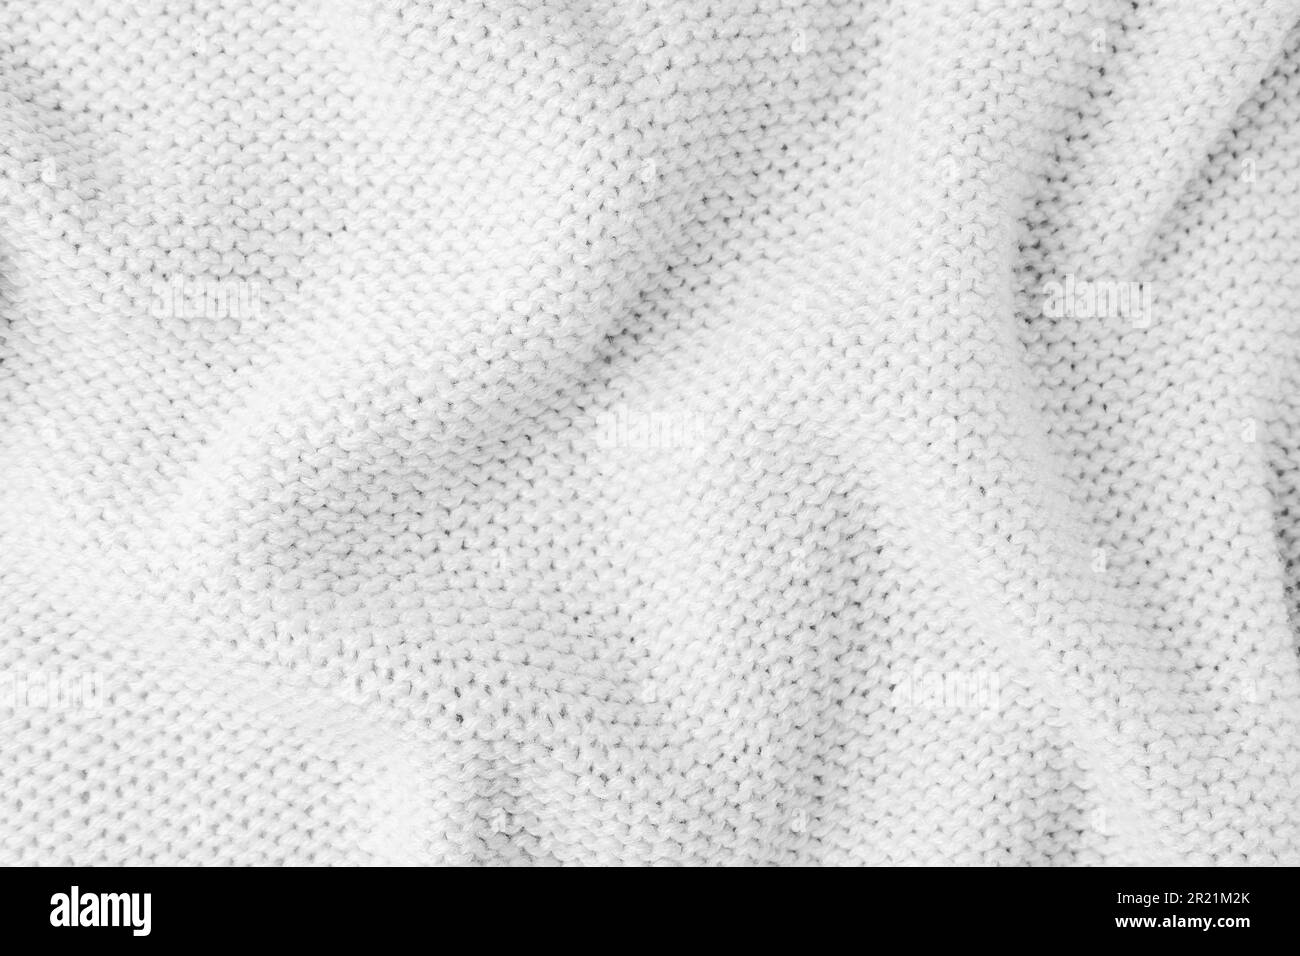 Close up background of knitted wool fabric made of viscose yarn. White color crumpled knitting wool knitwear texture. Abstract knitted wrinkled jersey Stock Photo